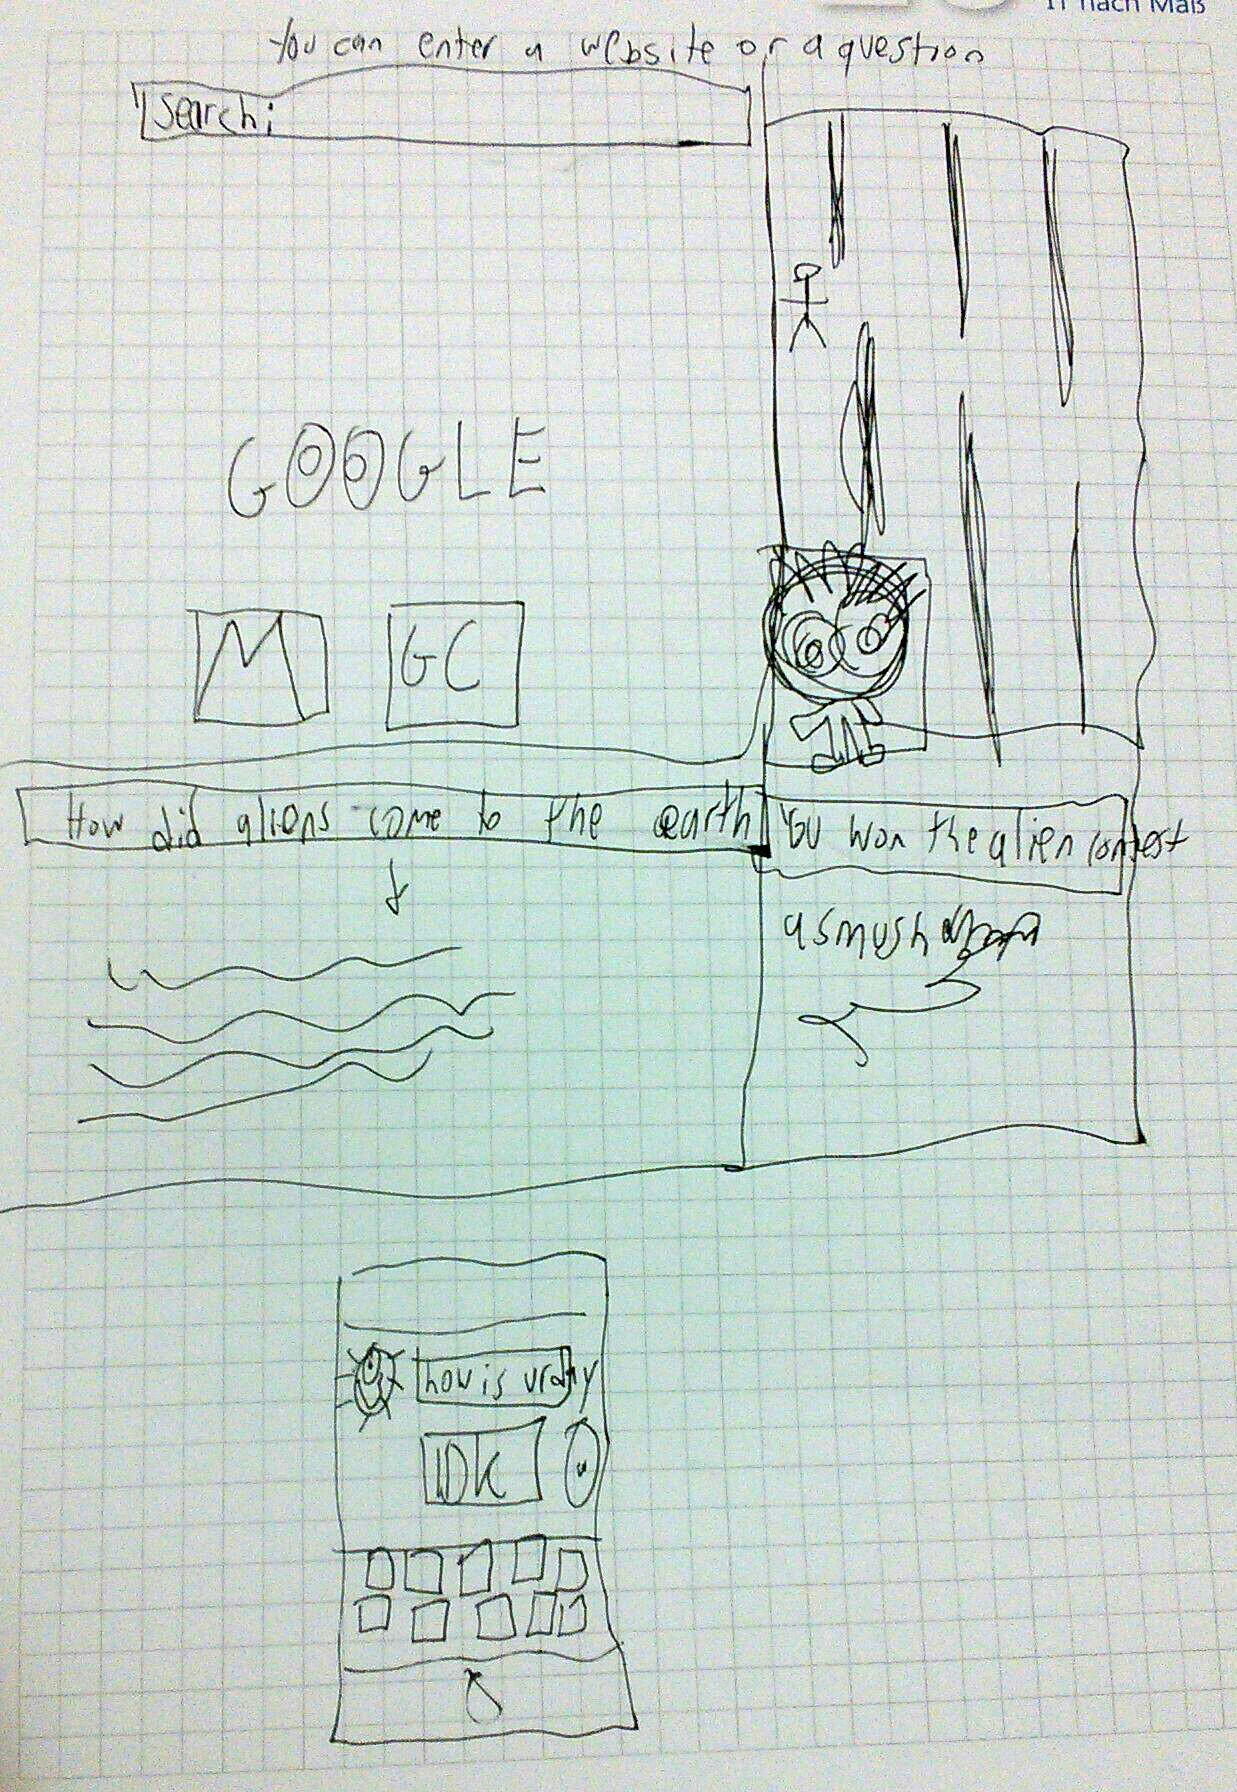 Google, an alien using Twitch, Google search results, and the interface of an IM software on an iPhone drawn by a 13 year old boy